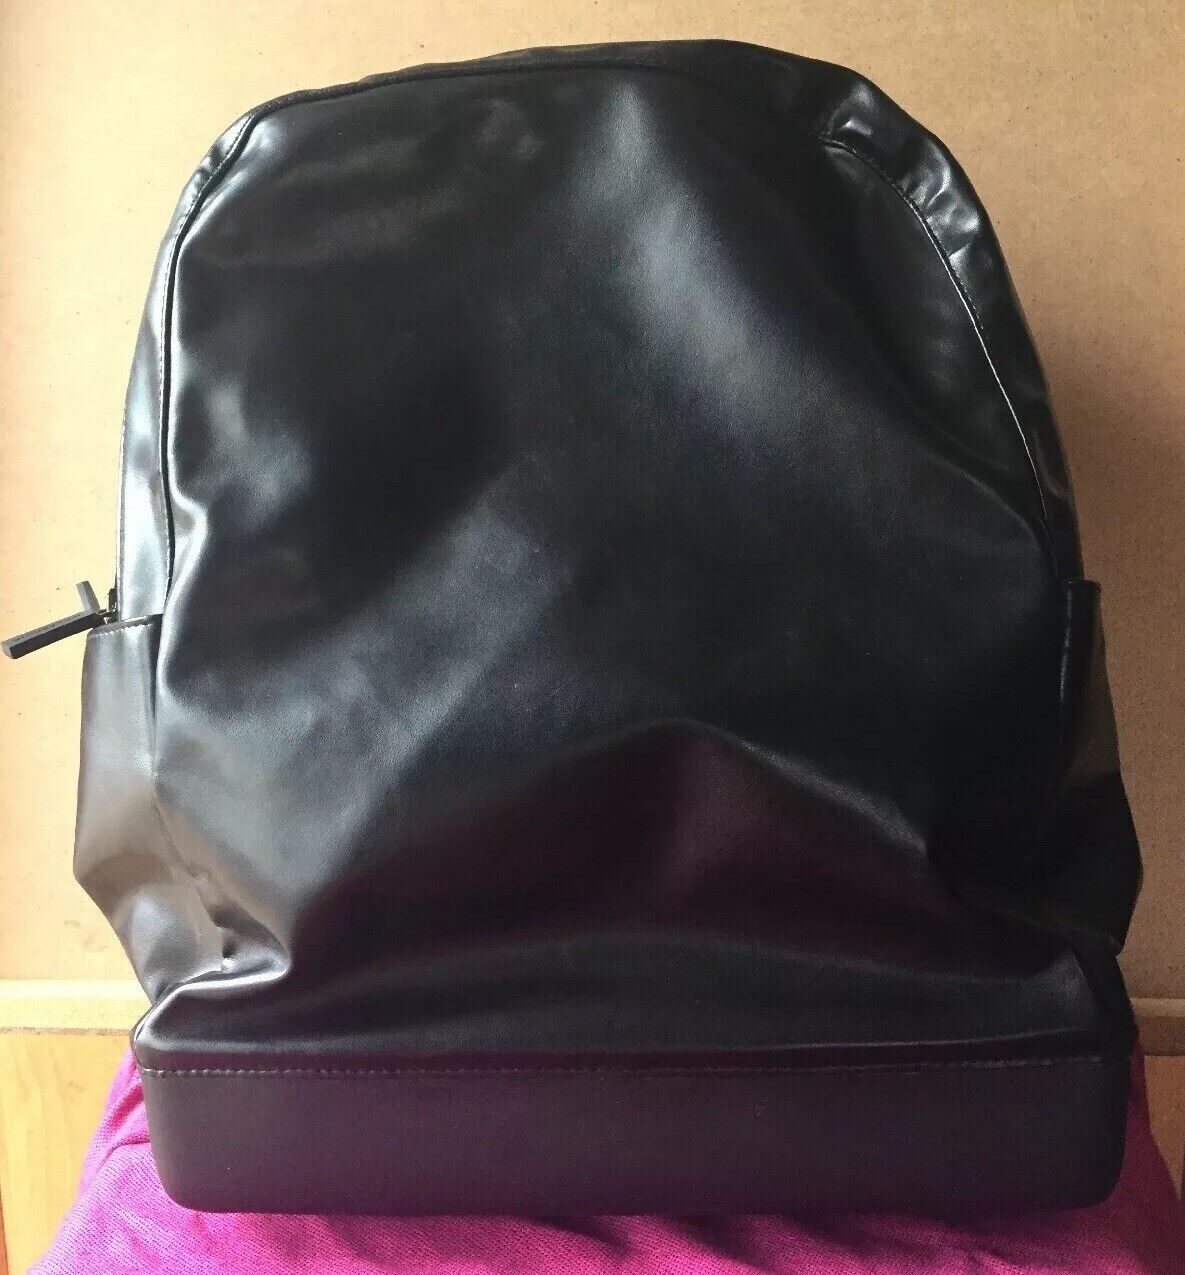 Moleskine Classic Matte Black Backpack,made in Italy,Good Condition